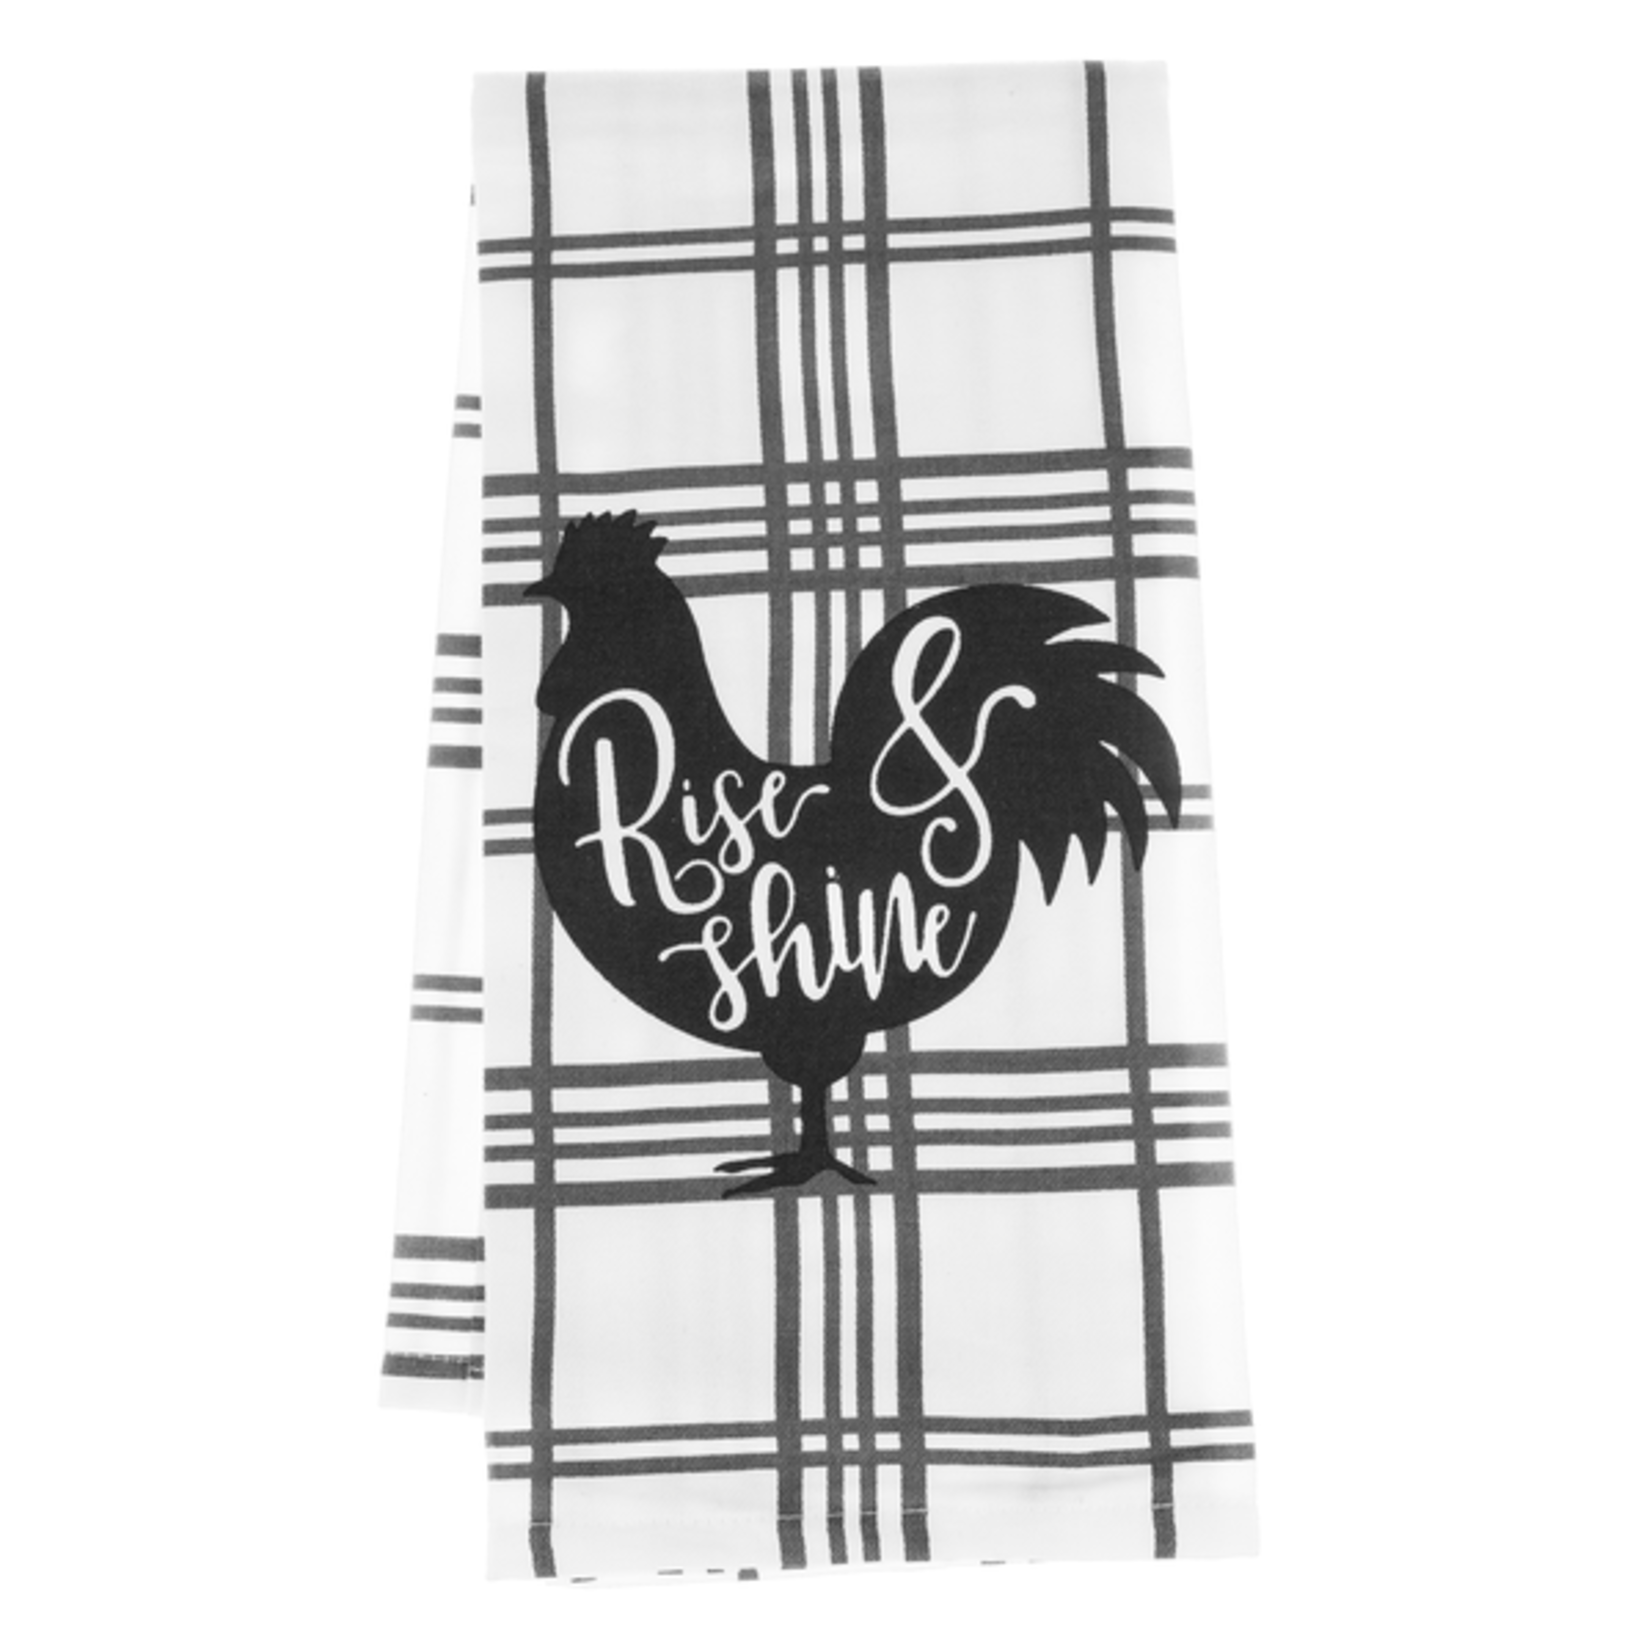 Ganz Black & White Rooster Towel Style 3